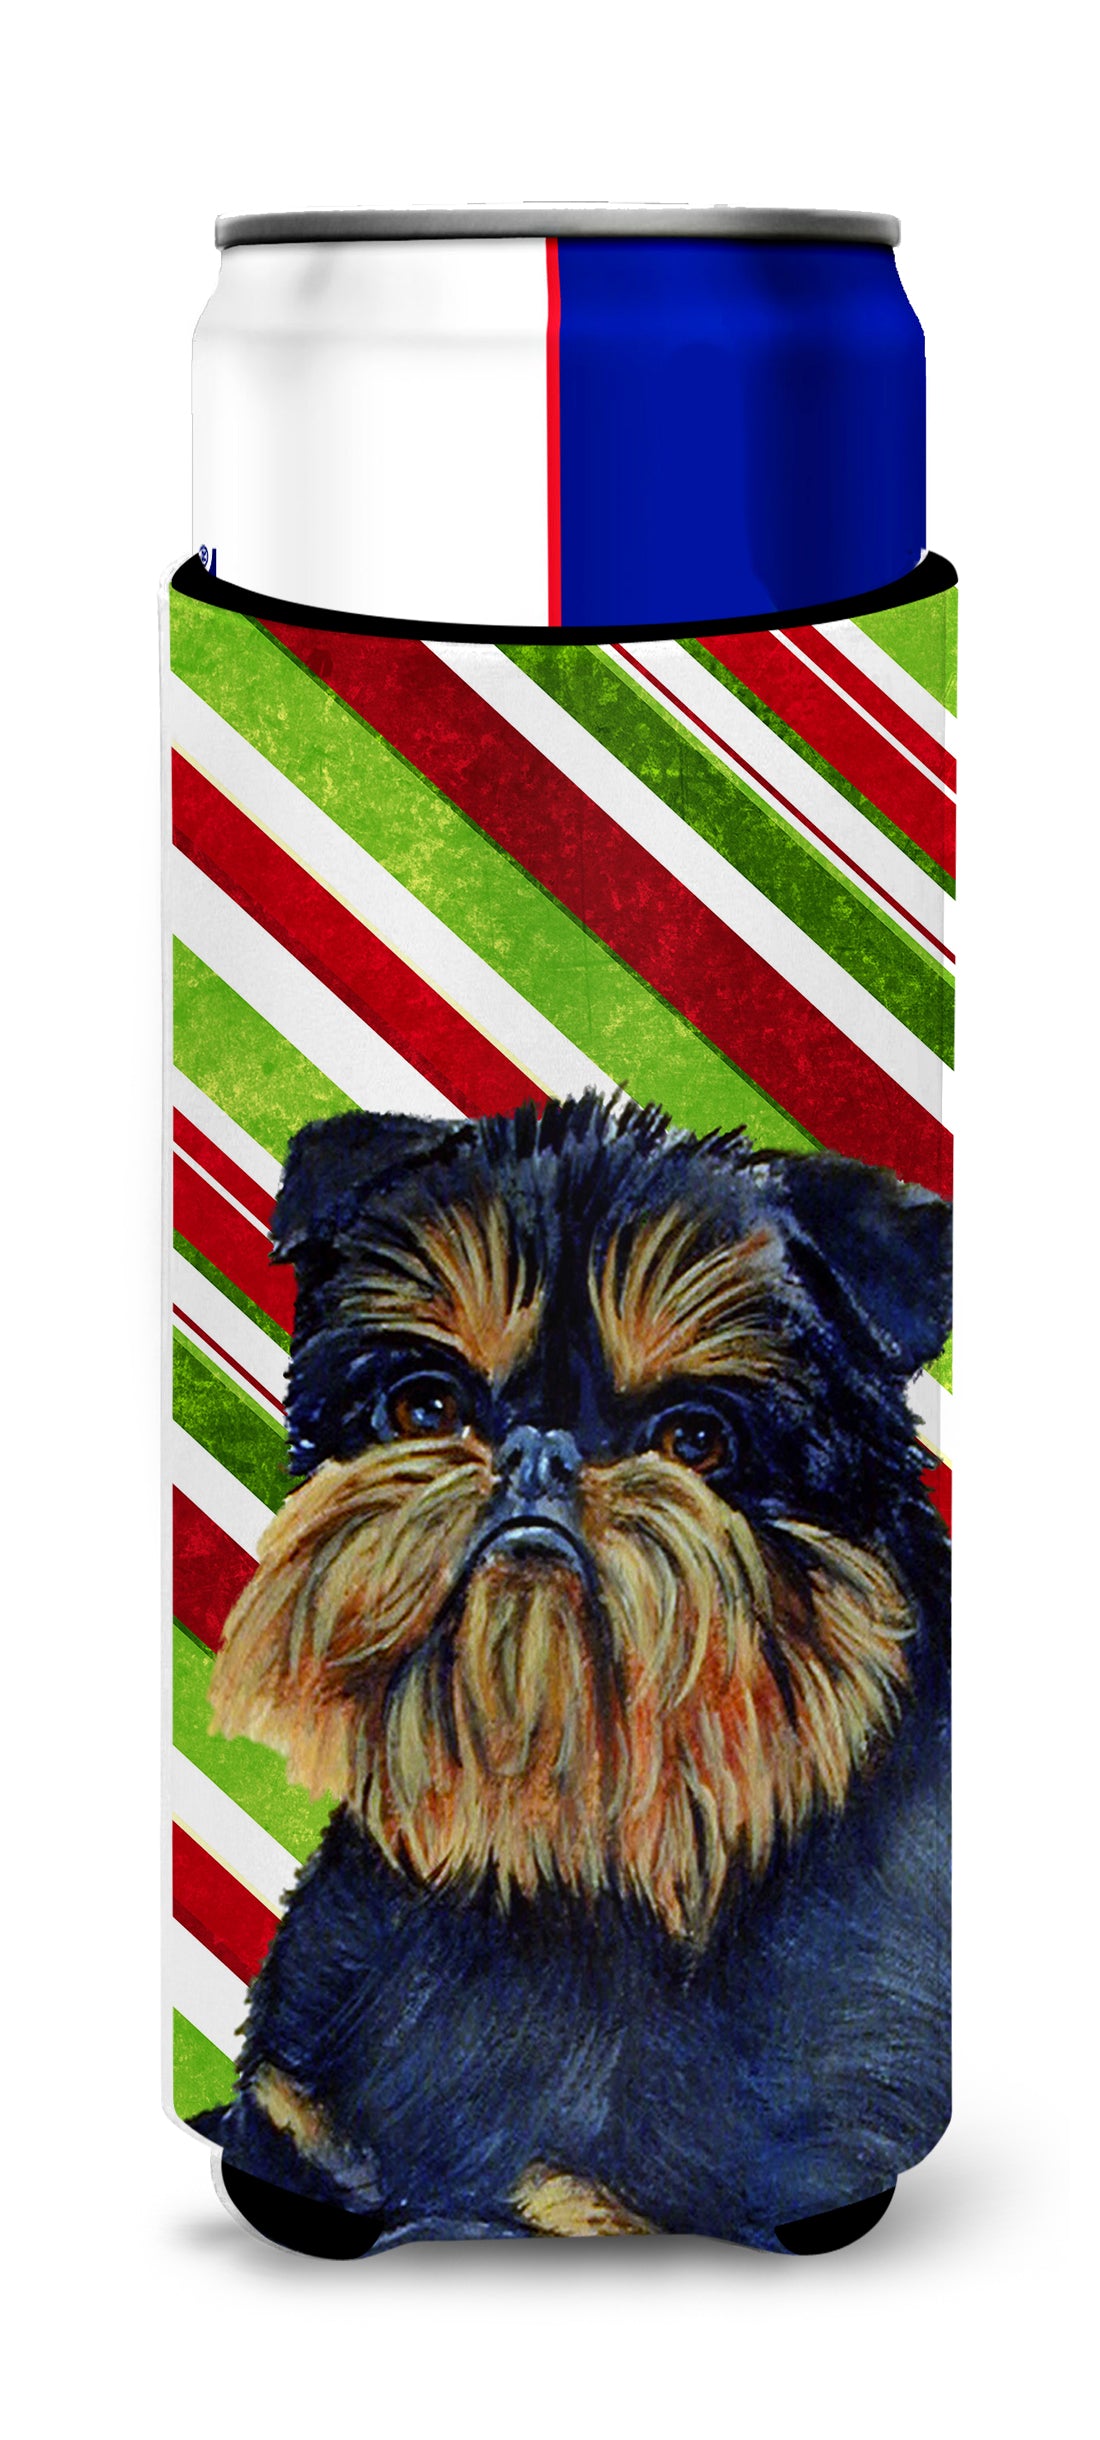 Brussels Griffon Candy Cane Holiday Christmas Ultra Beverage Insulators for slim cans LH9253MUK